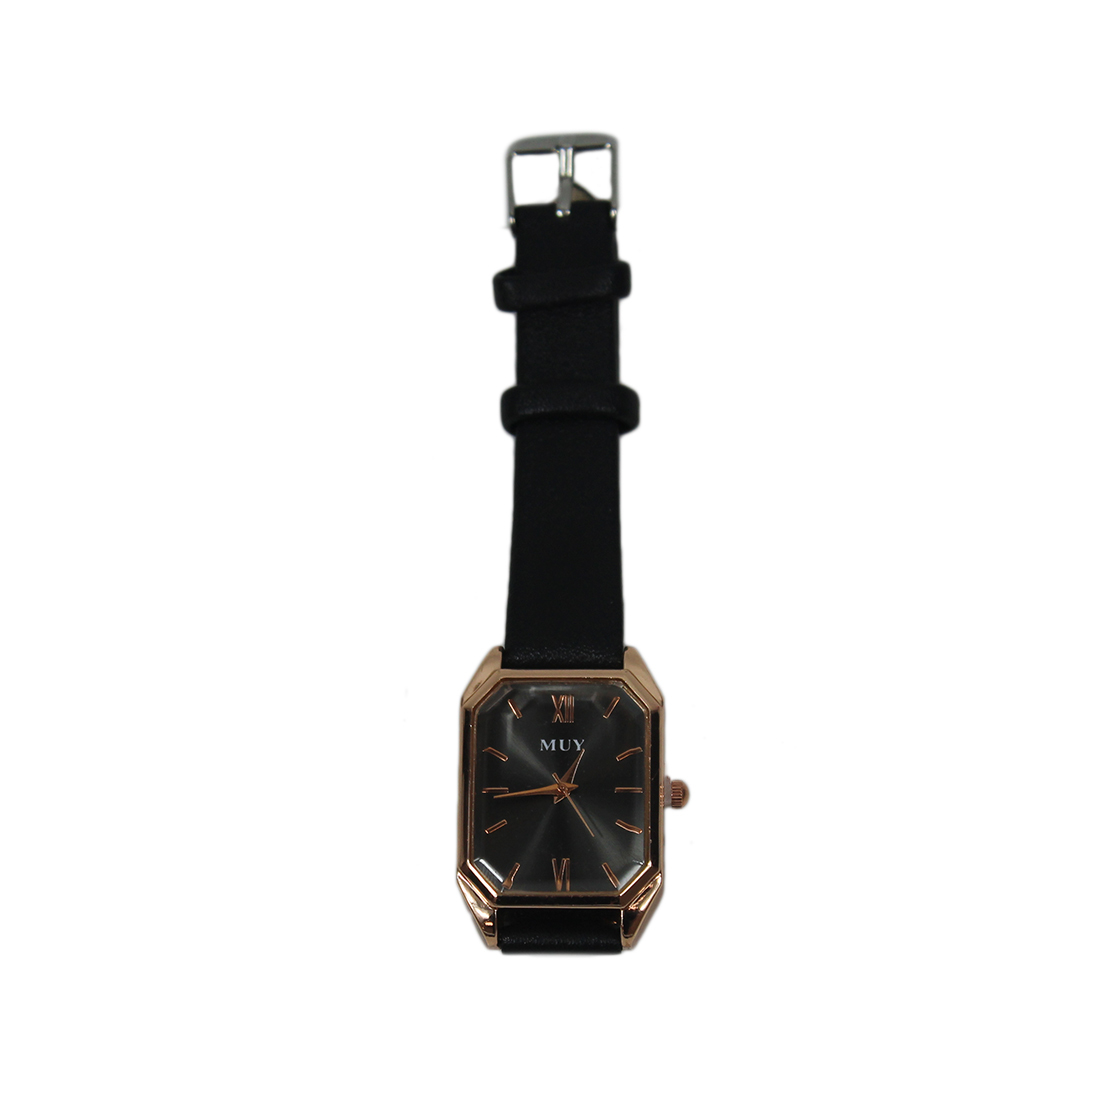 Thin Strap with square shape face